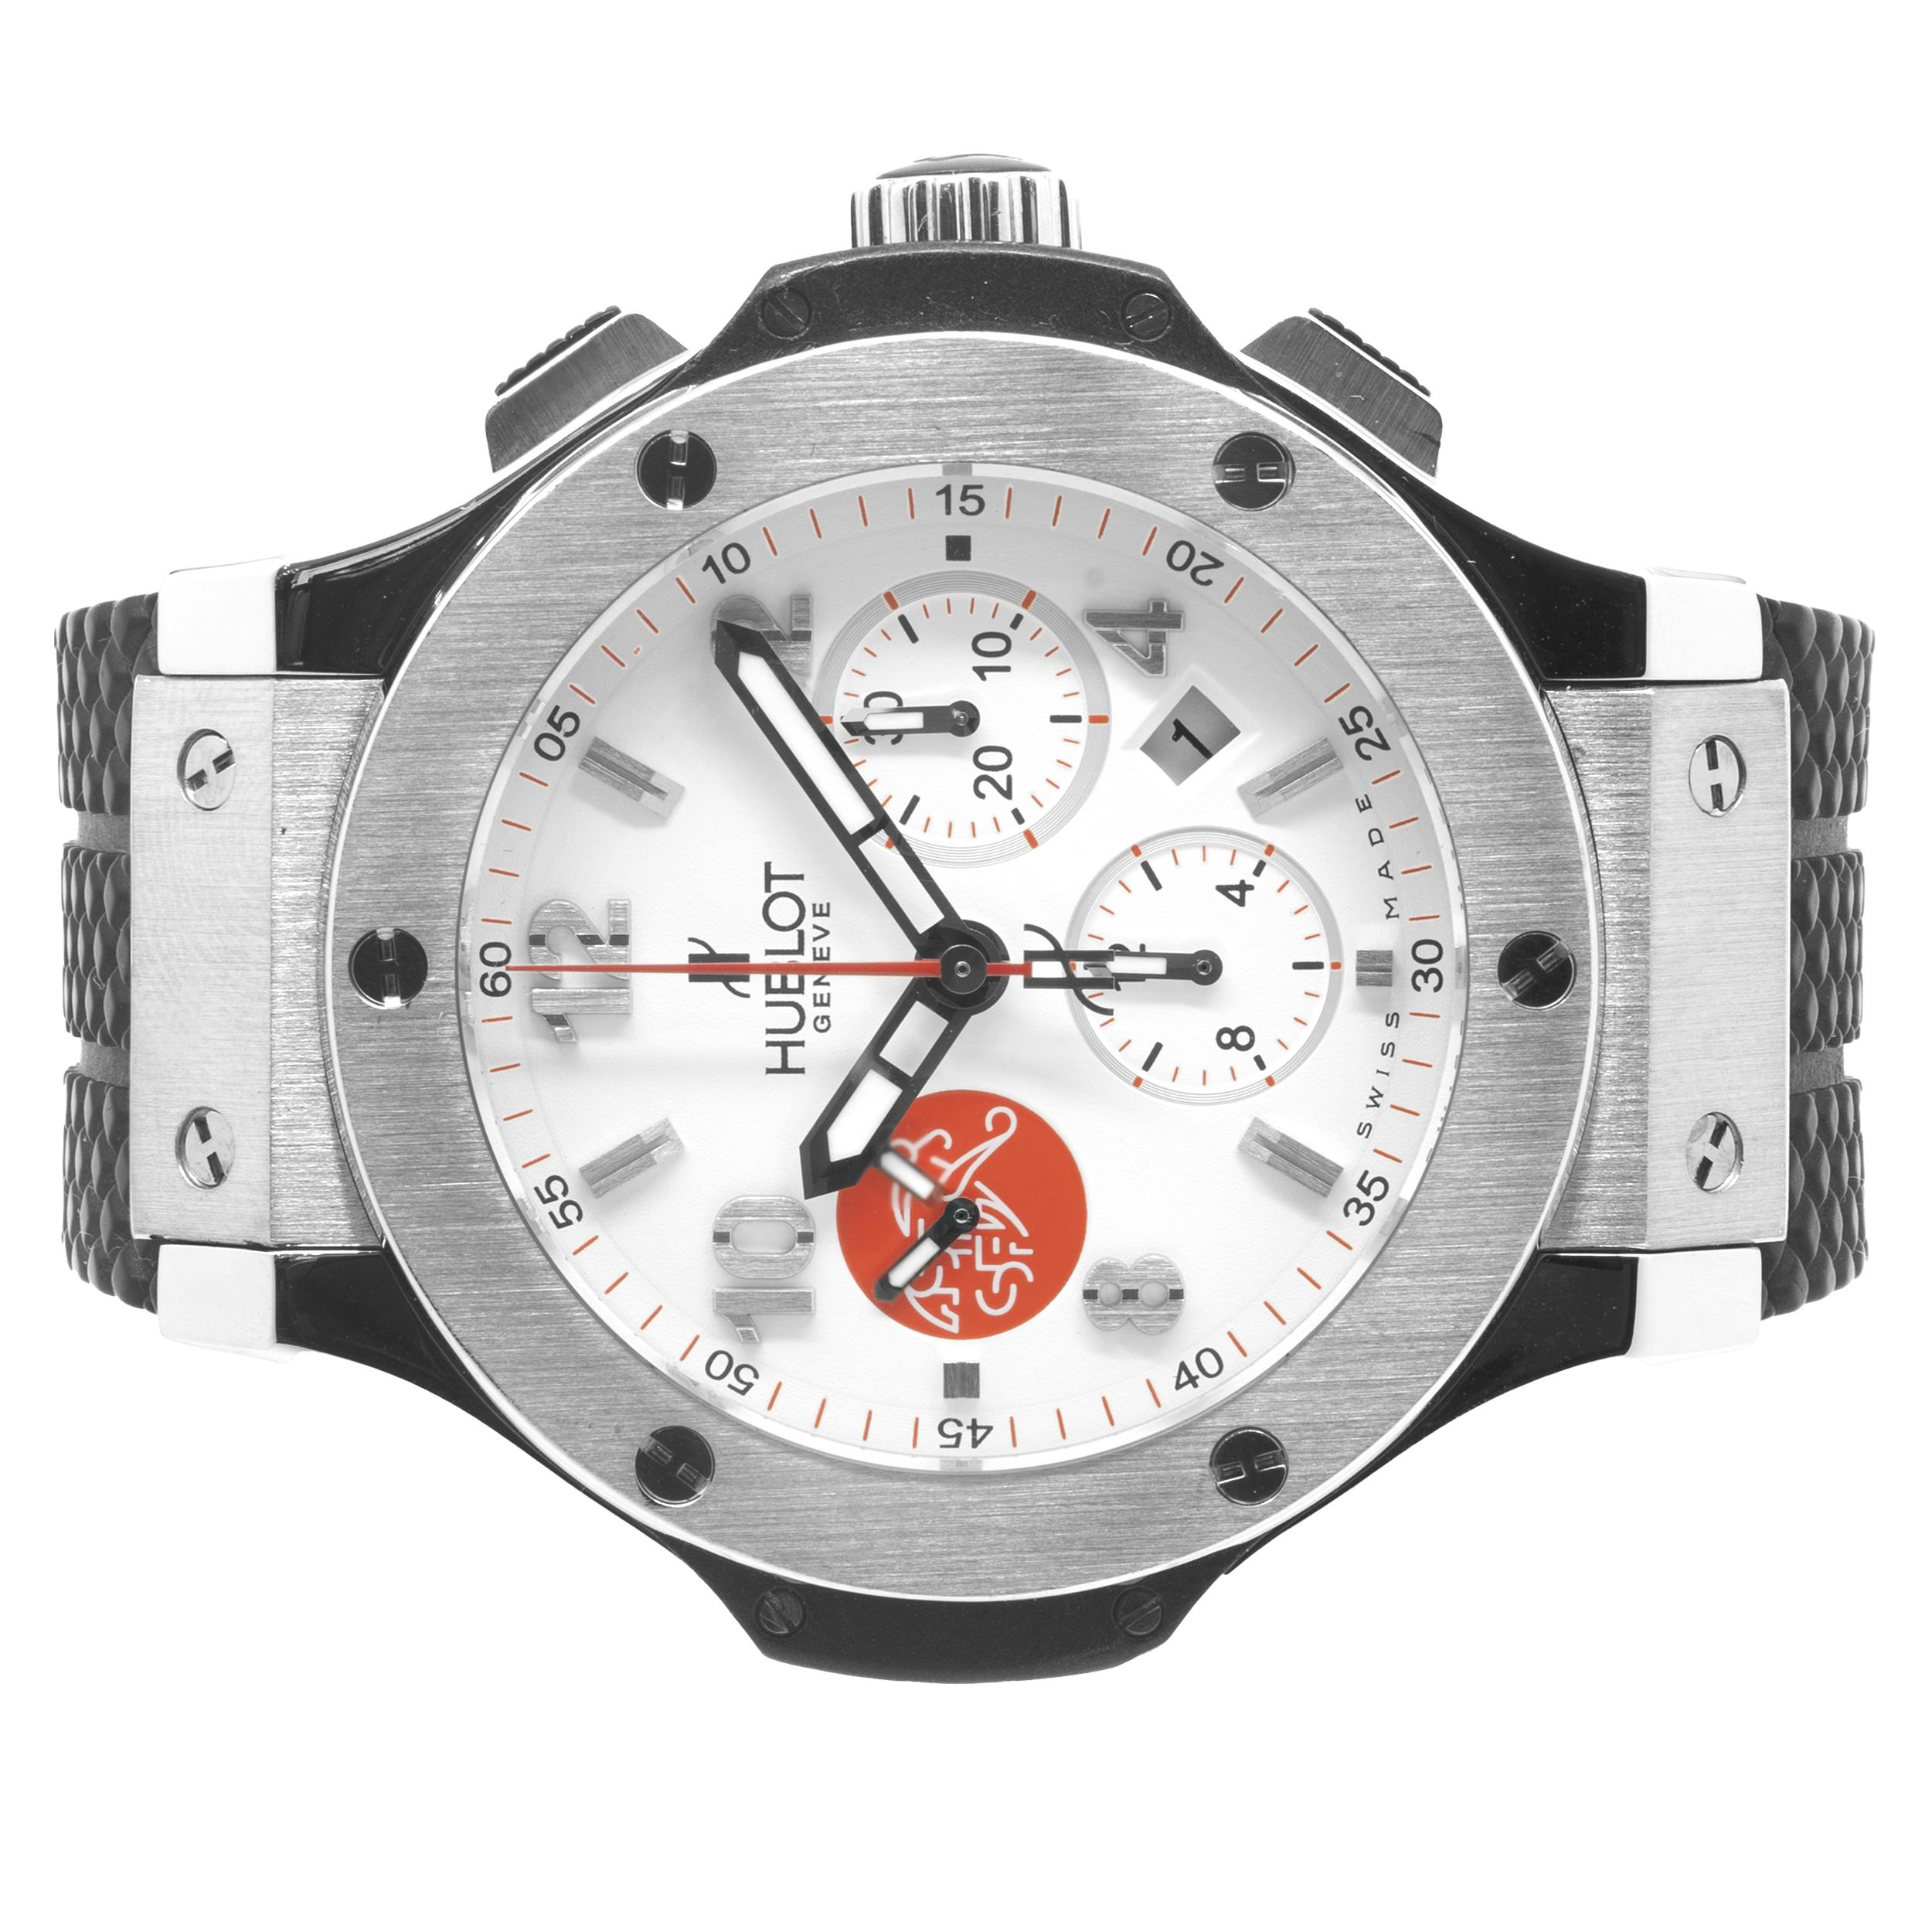 Movement: automatic
Function: hours, minutes, seconds, date, chronograph
Case: 44mm stainless steel case, steel bezel
Band: black rubber  Hublot strap with deployment clasp
Dial: white ASF – SFV limited edition dial
Reference #:  310
Serial #: